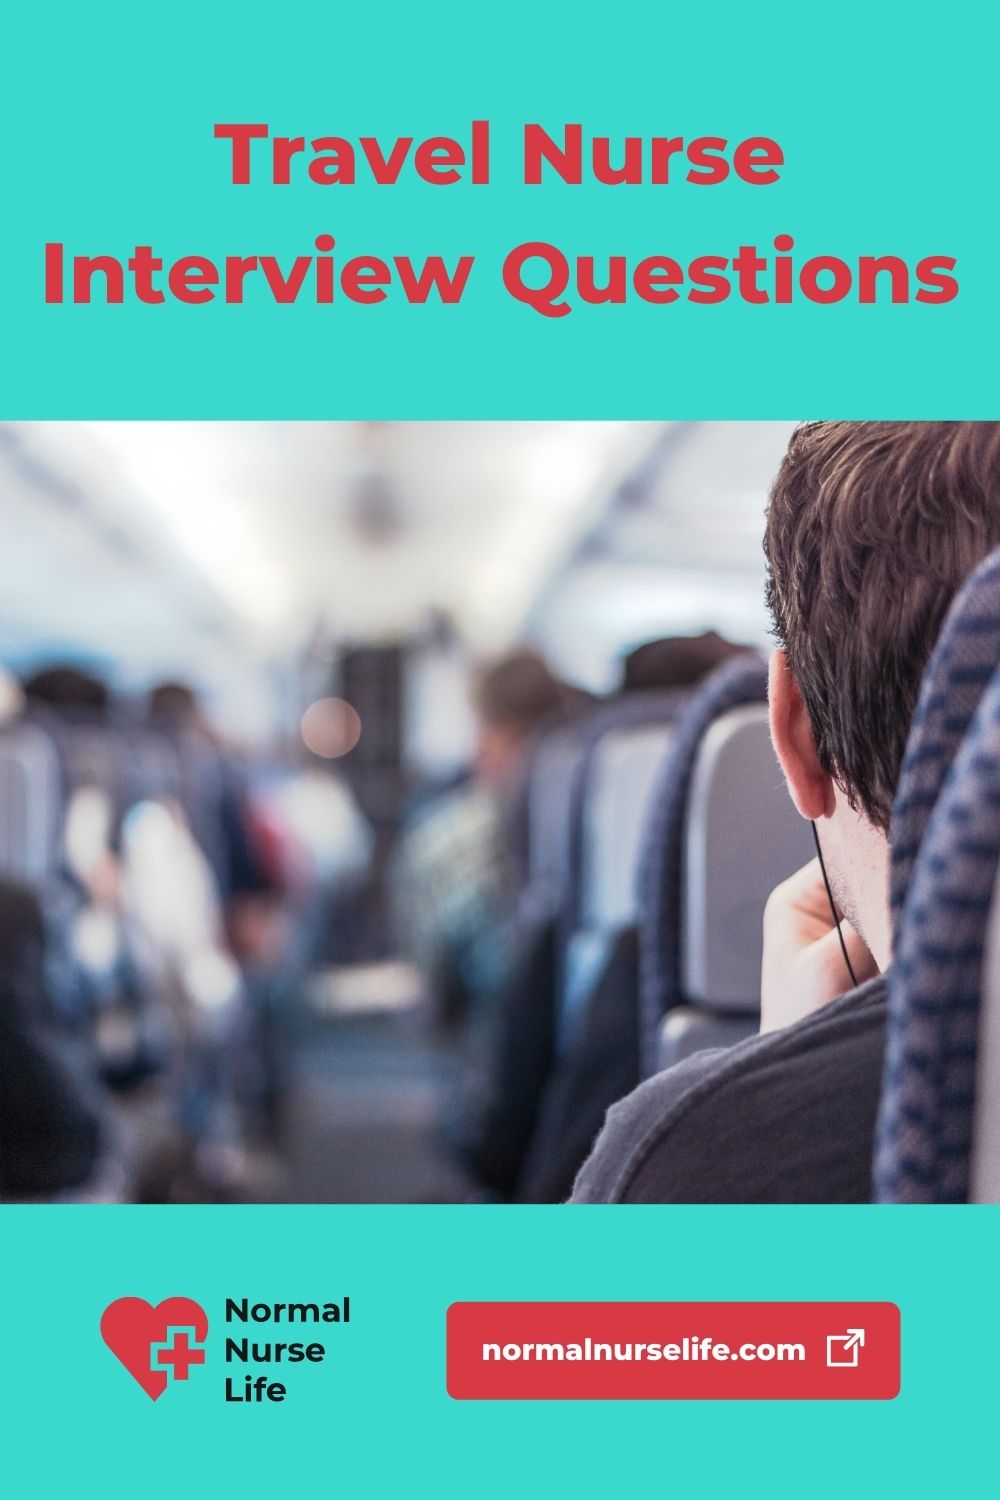 Travel nurse interview questions and answers